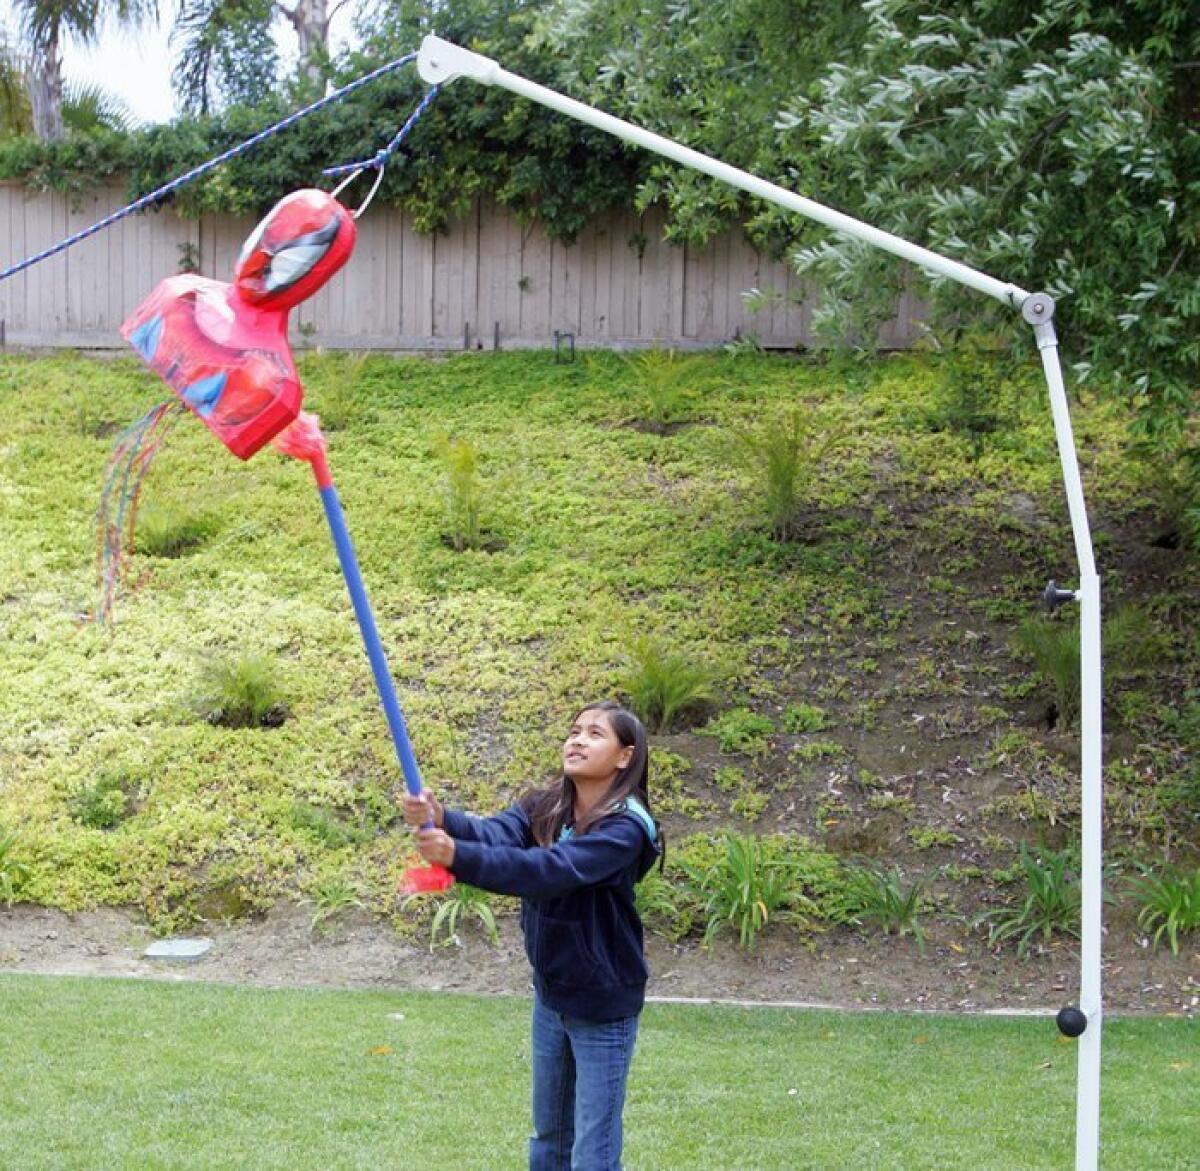 Father pins hopes on patented piñata holder - The San Diego Union